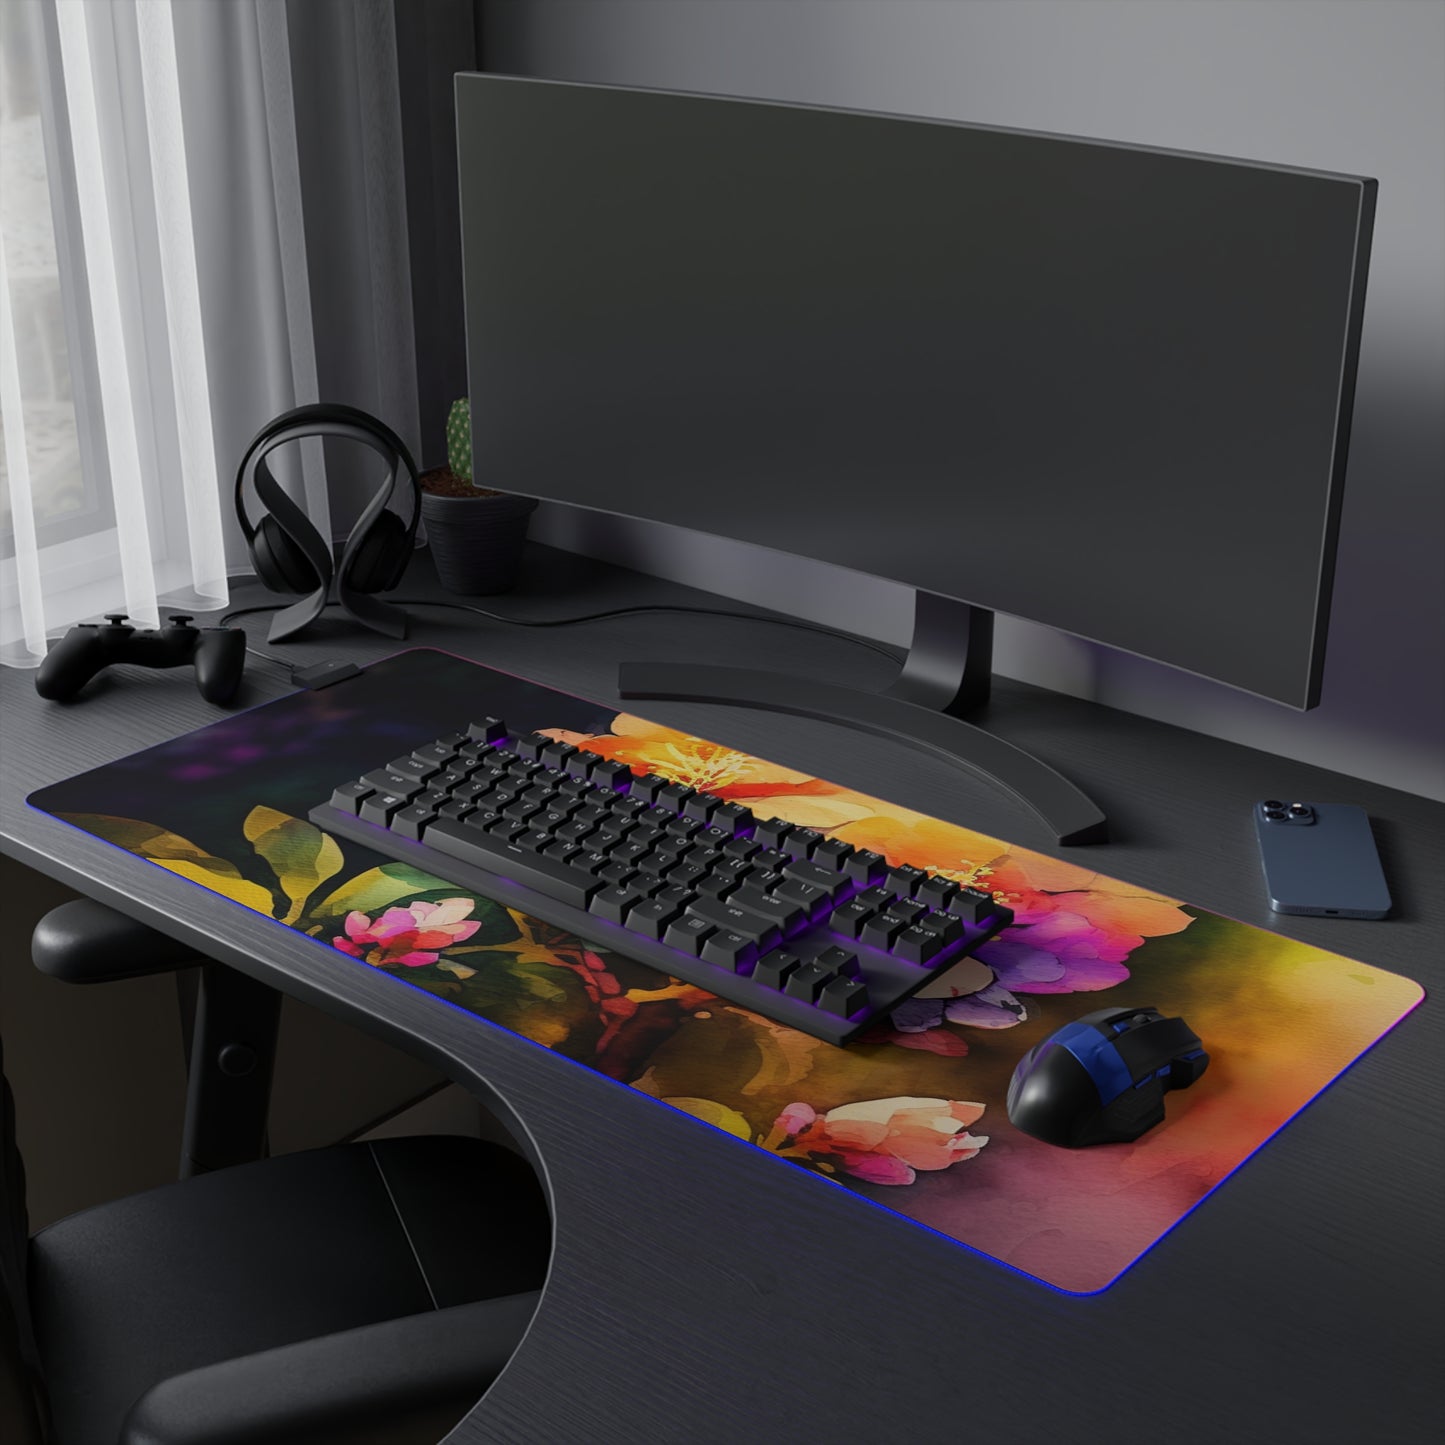 LED Gaming Mouse Pad Bright Spring Flowers 2